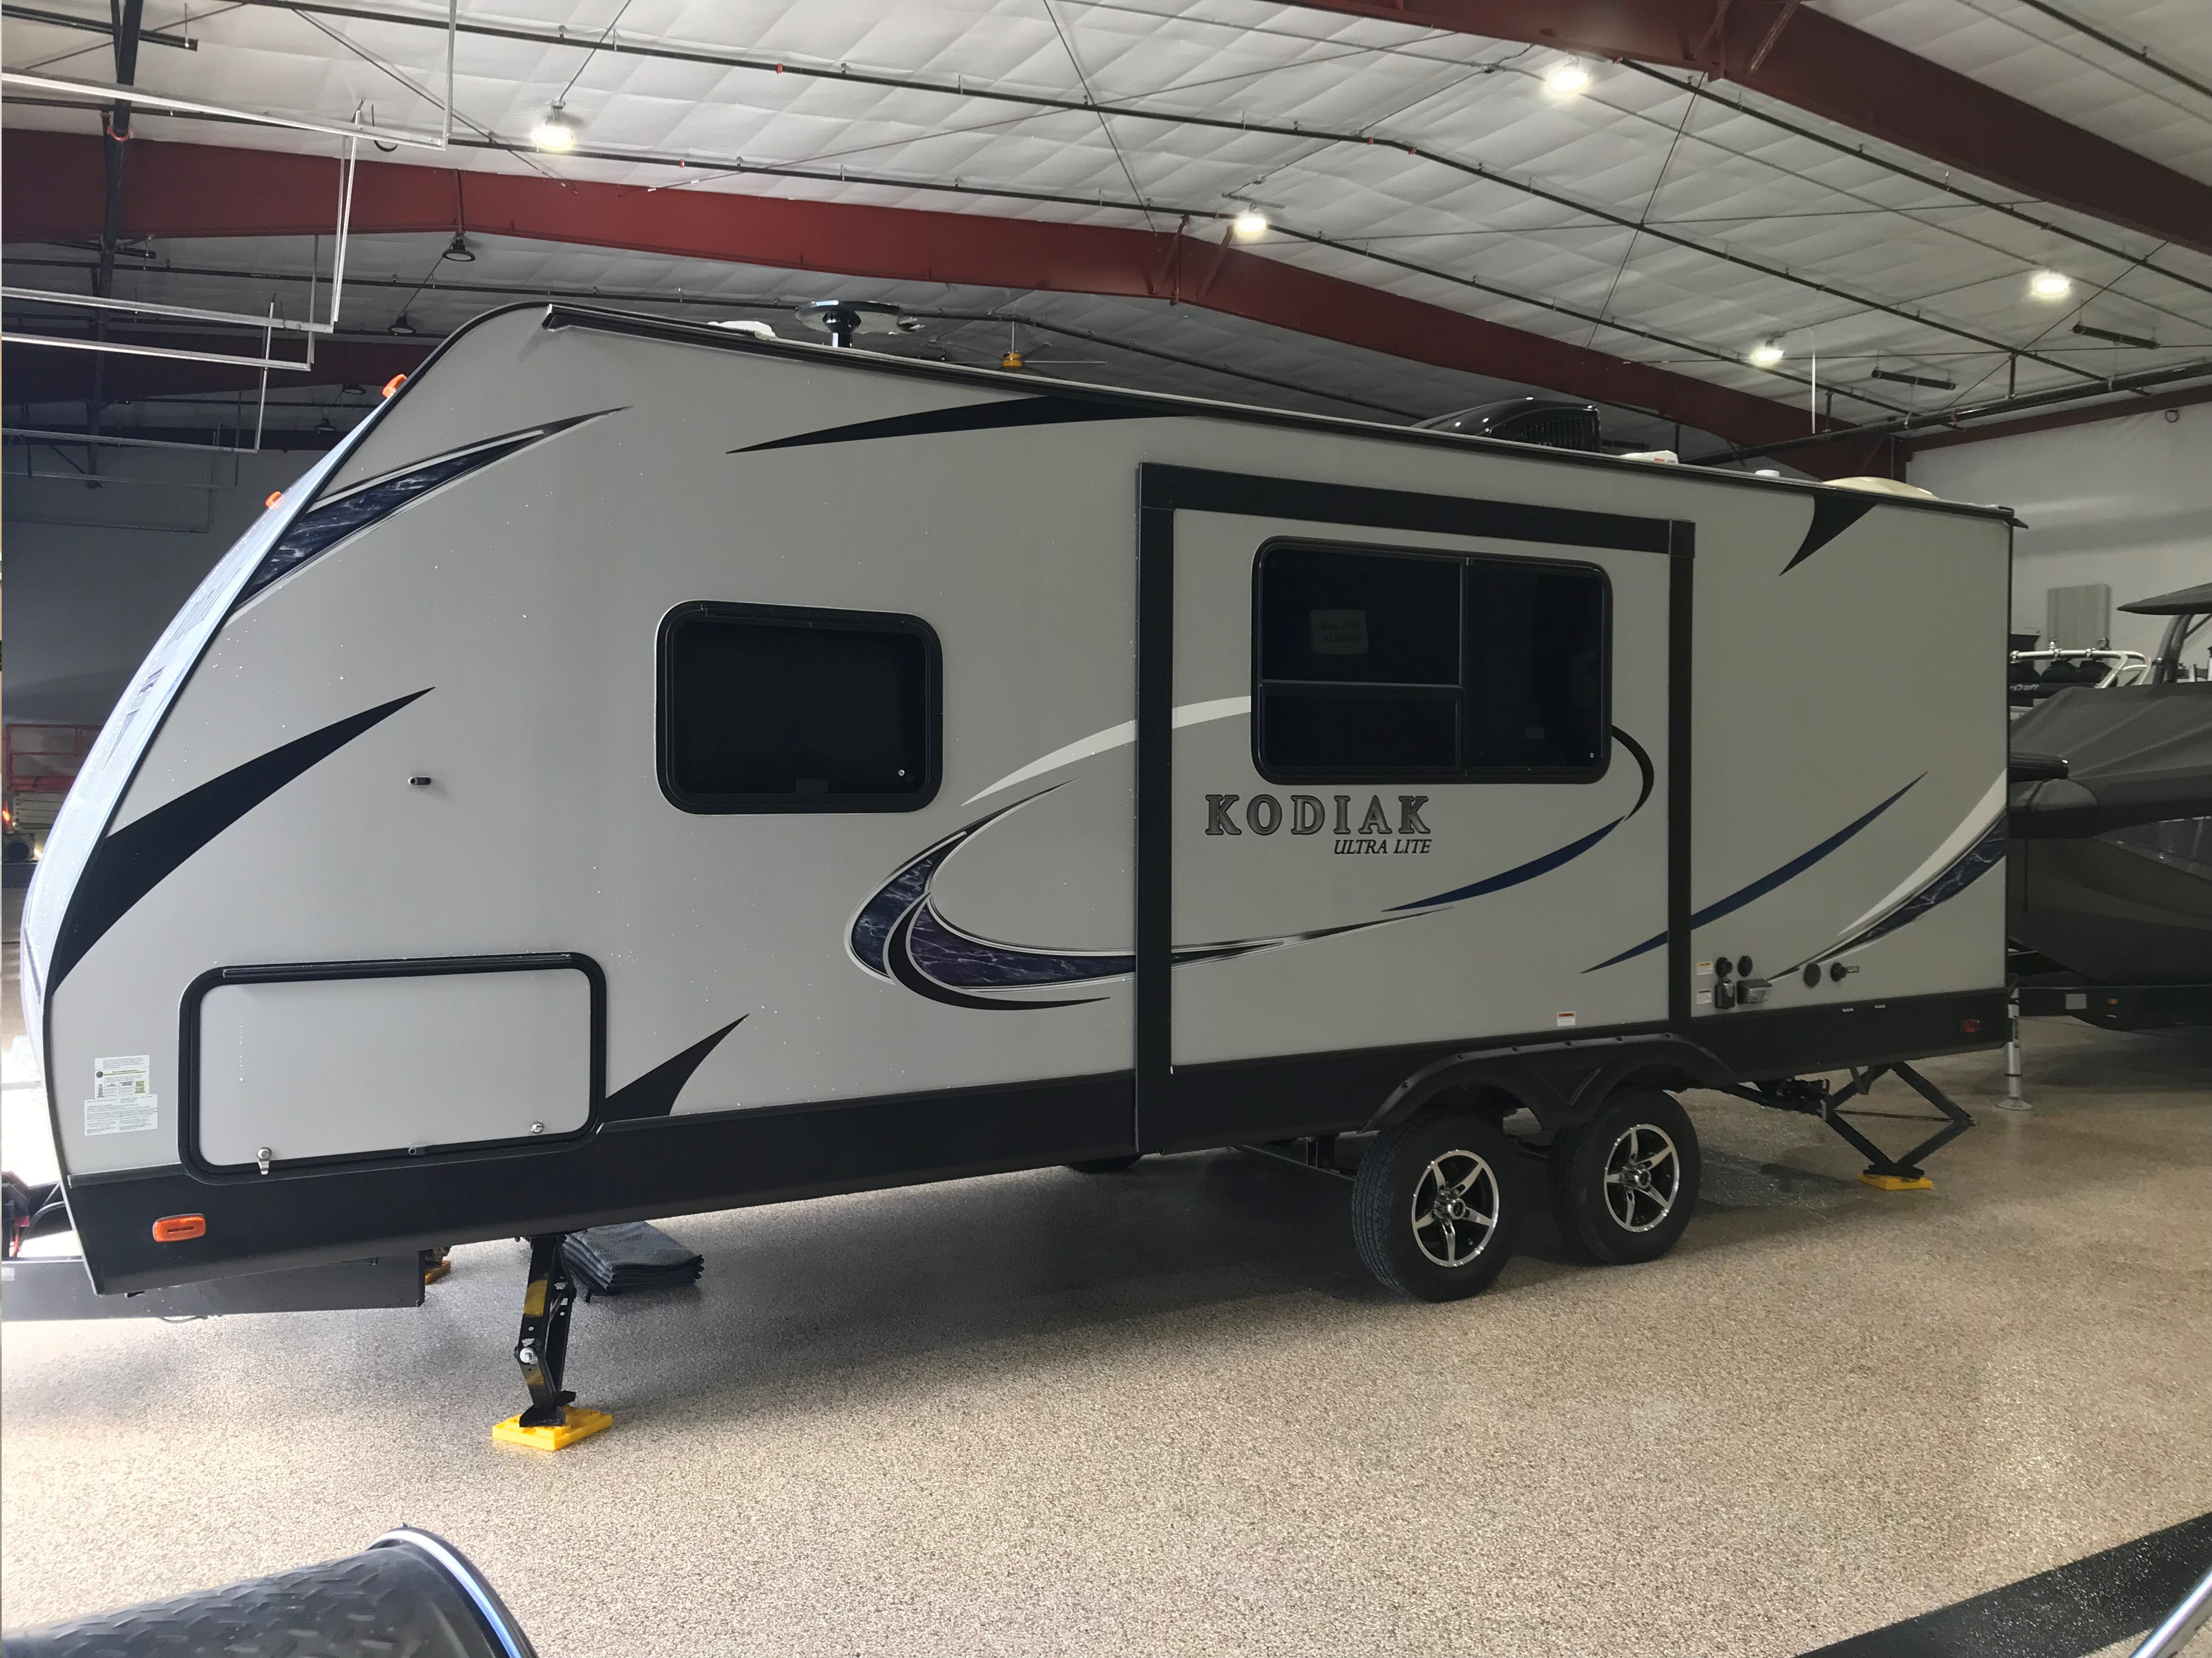 Count on Toy Garage for Recreational Vehicle Heated Storage Units Near Highway 2